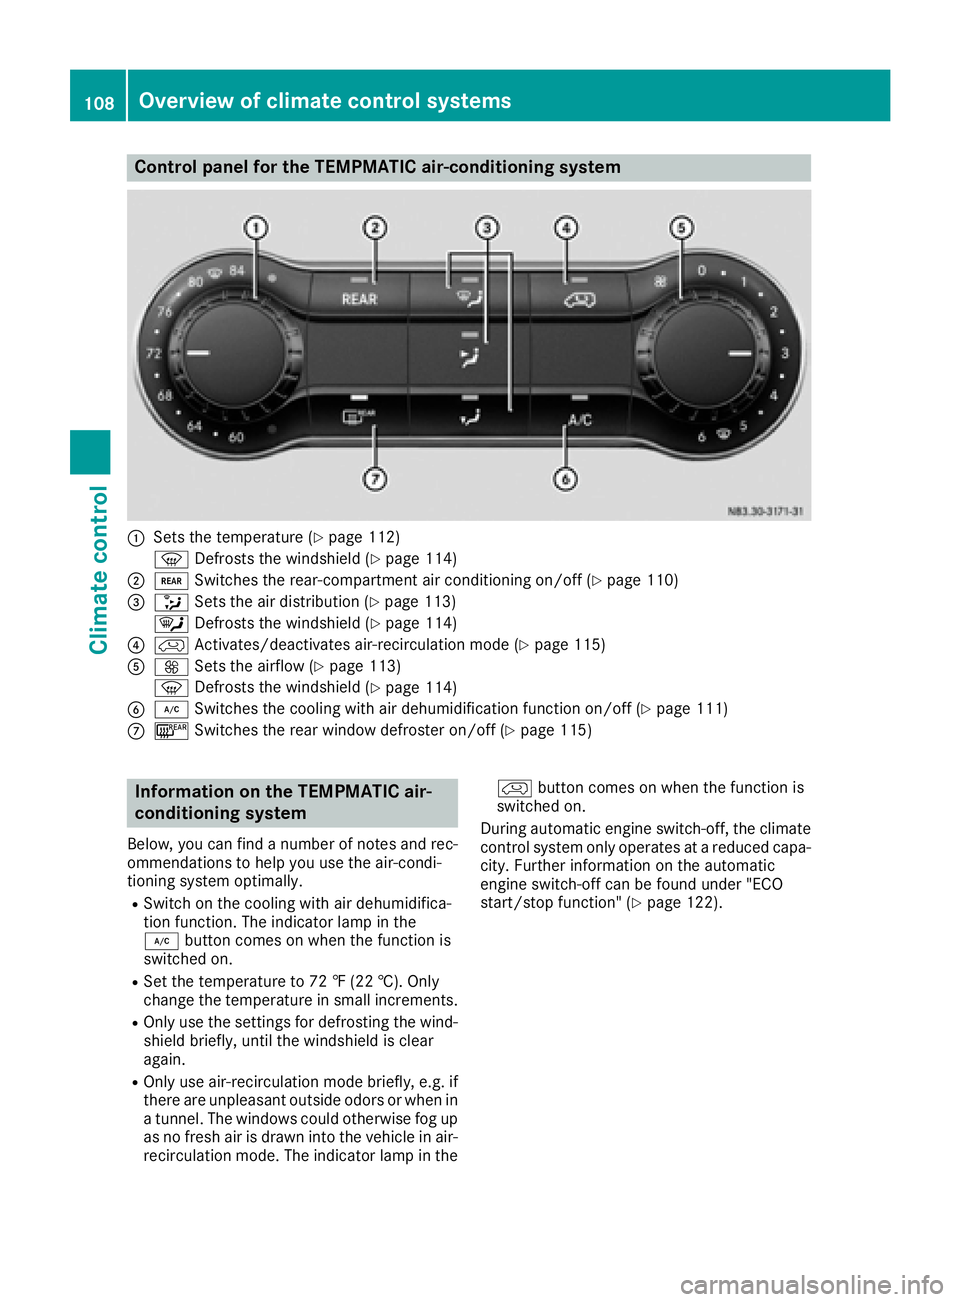 MERCEDES-BENZ METRIS 2016  MY16 Operator’s Manual Control panel for theTEMPMATIC air-conditioning system
:Set sthe temperatur e(Ypage 112)
z Defrostst hewindshield (
Ypage 114)
;/ Switches th erear-compartmen tair conditioning on/of f(Ypage 110)
=_Se